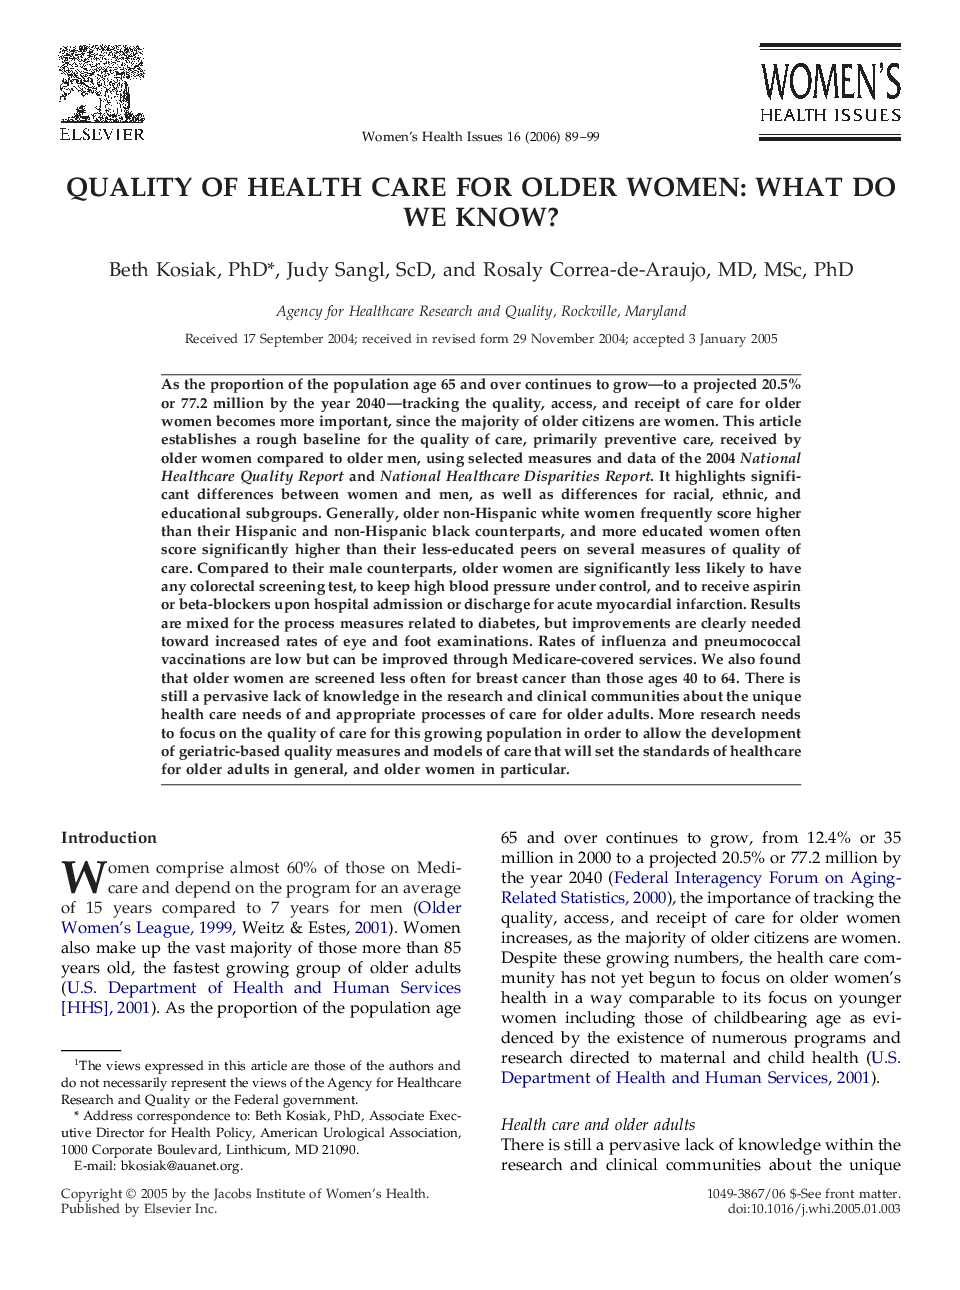 Quality of health care for older women: What do we know? 1